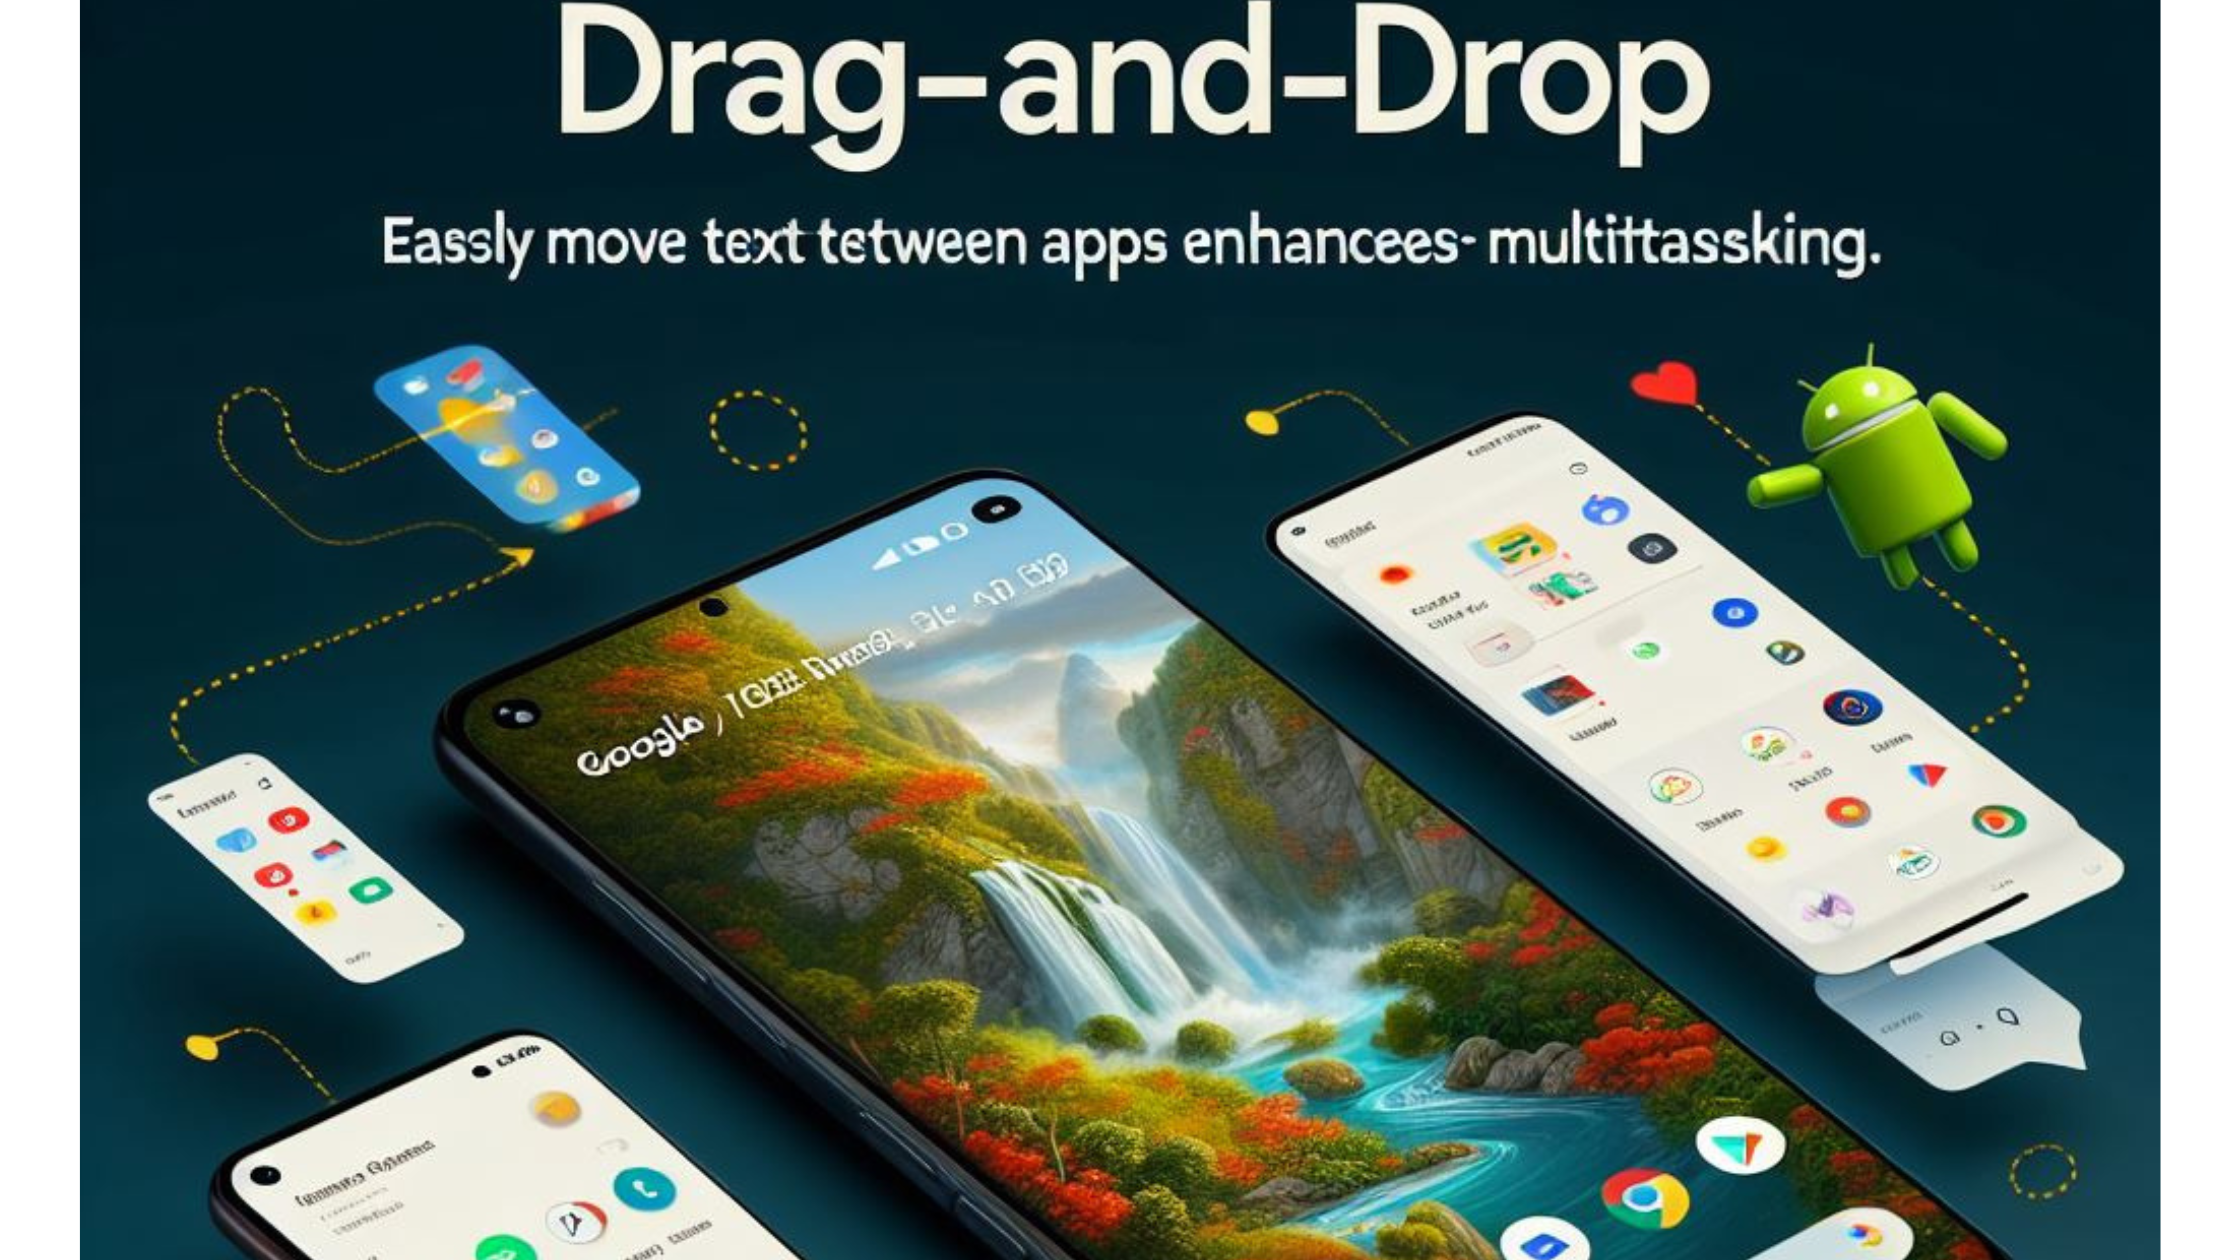 Android 14's drag-and-drop feature enhances multitasking. Easily move text between apps on Google Pixel 8 Pro or Samsung Galaxy S23 Ultra, streamlining user interactions.